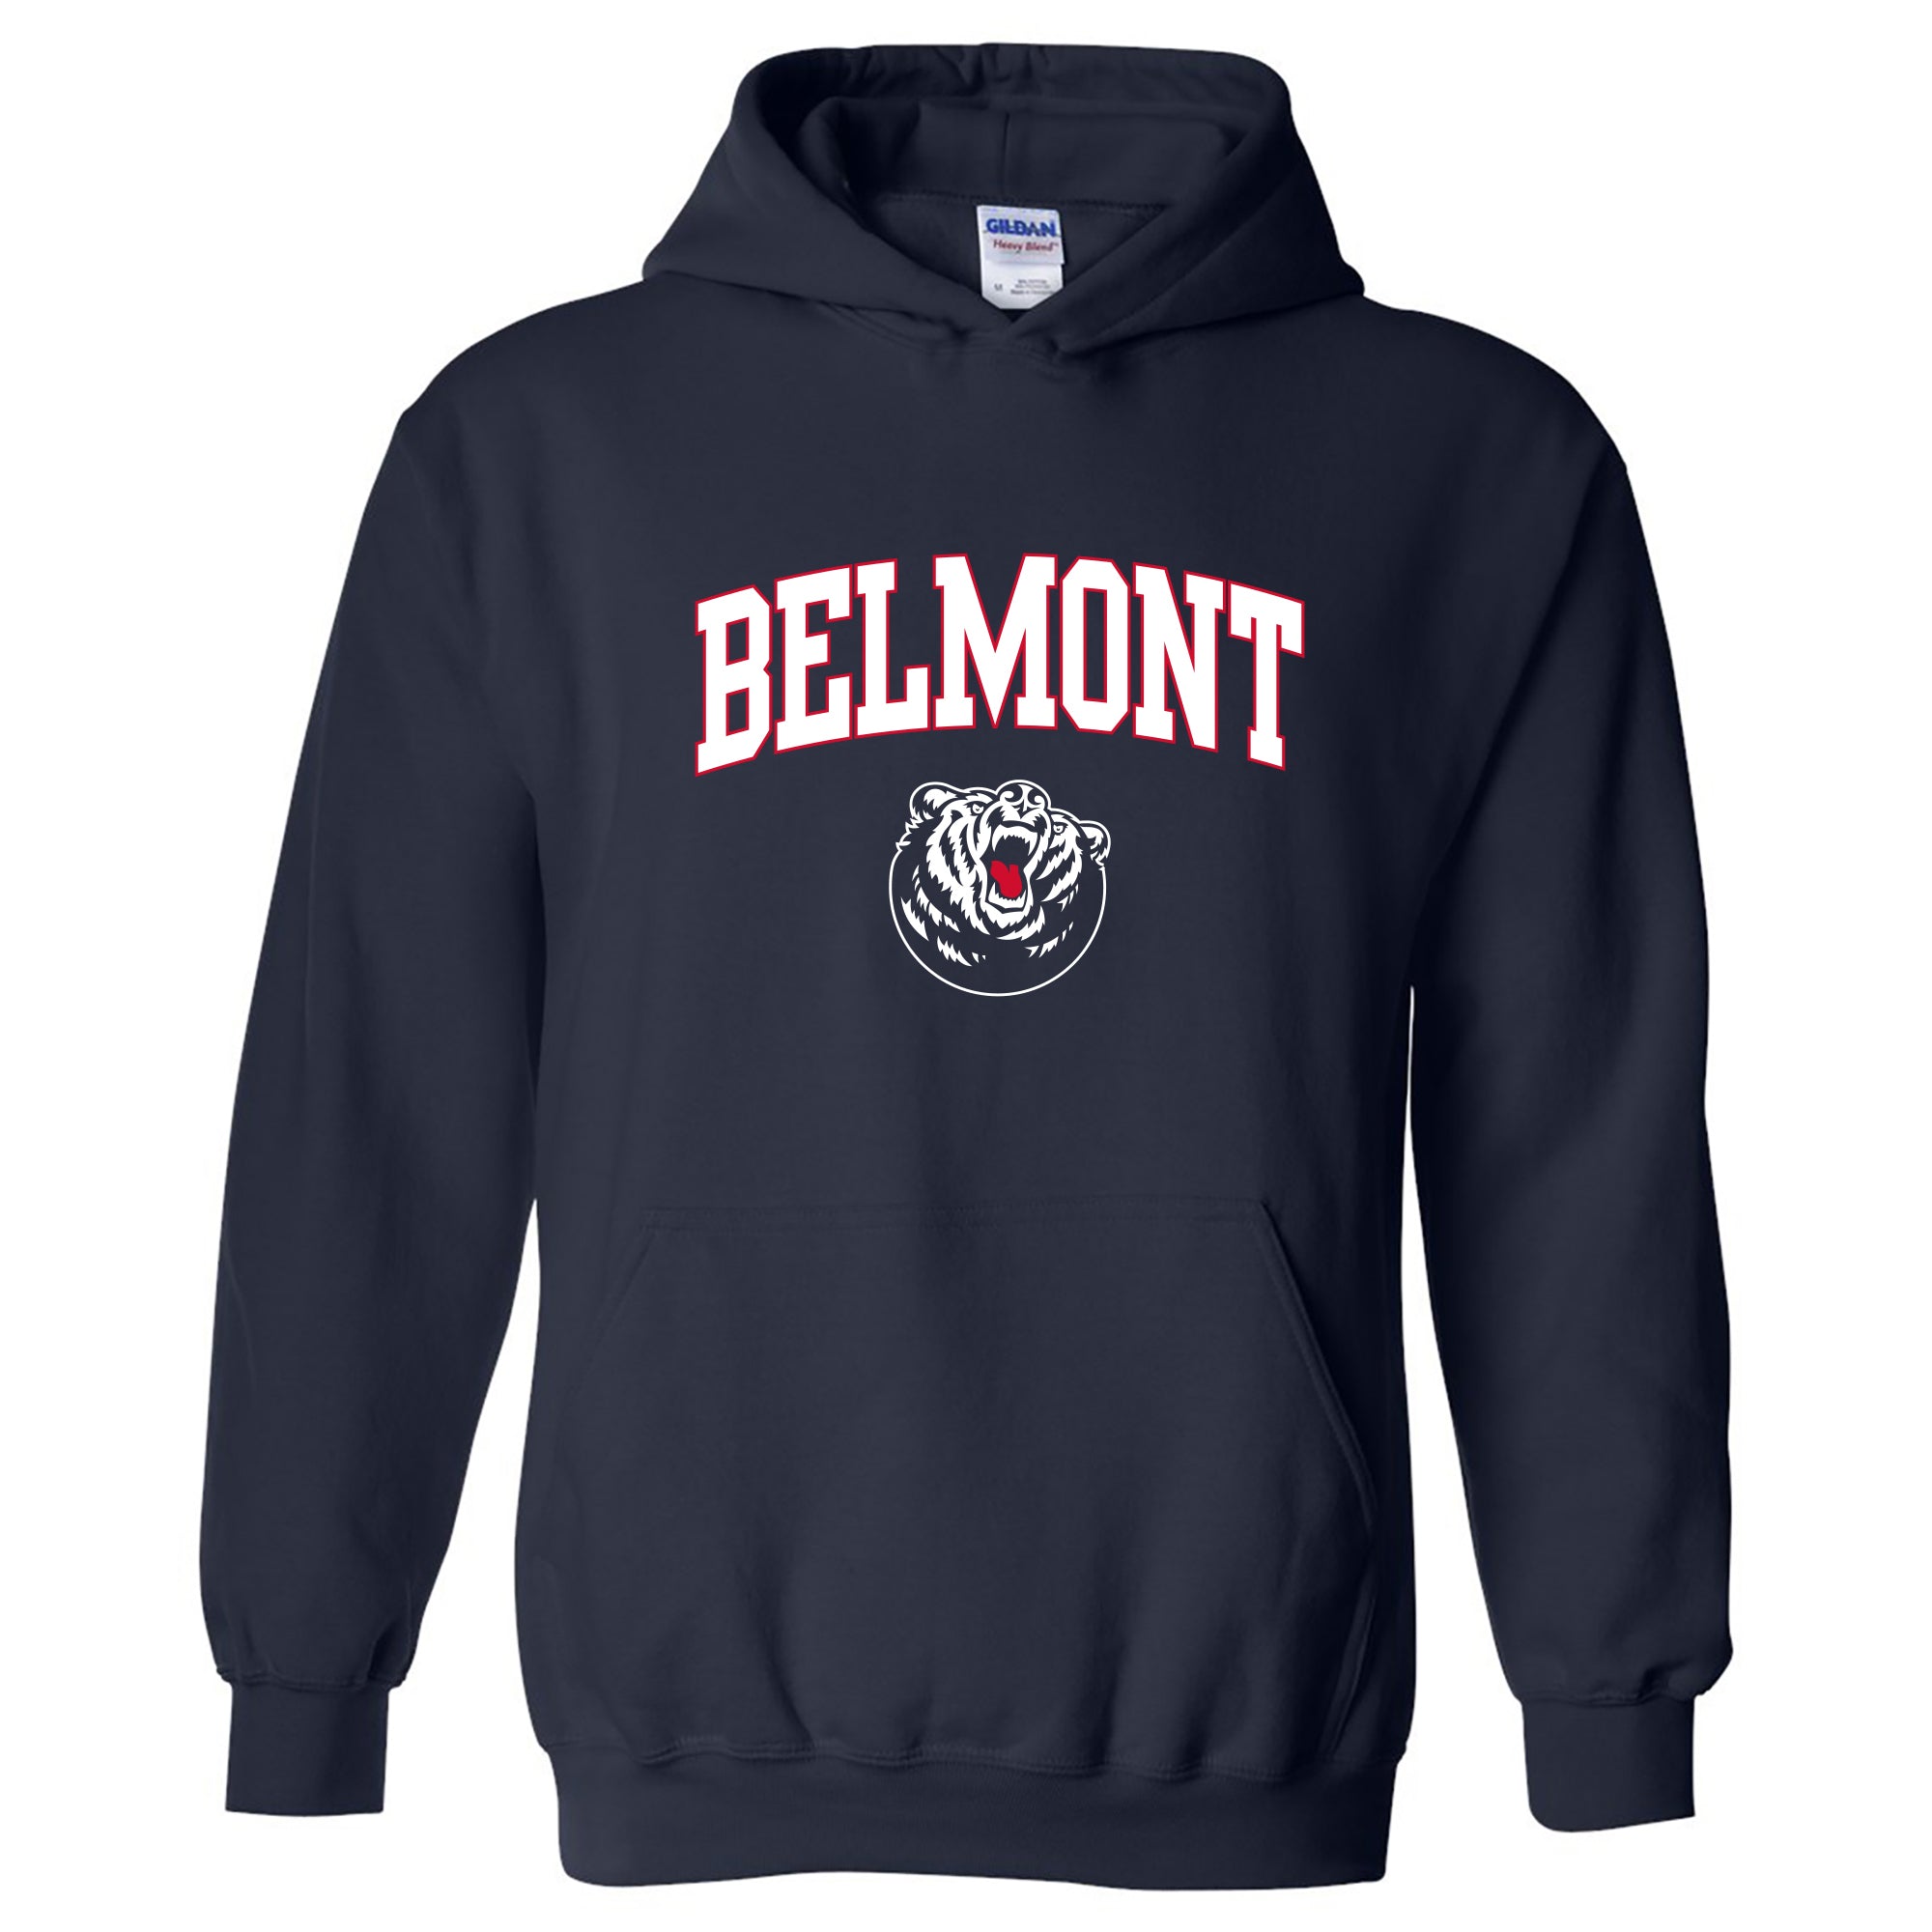 Belmont University Bruins Hooded Sweatshirt Embroidered with